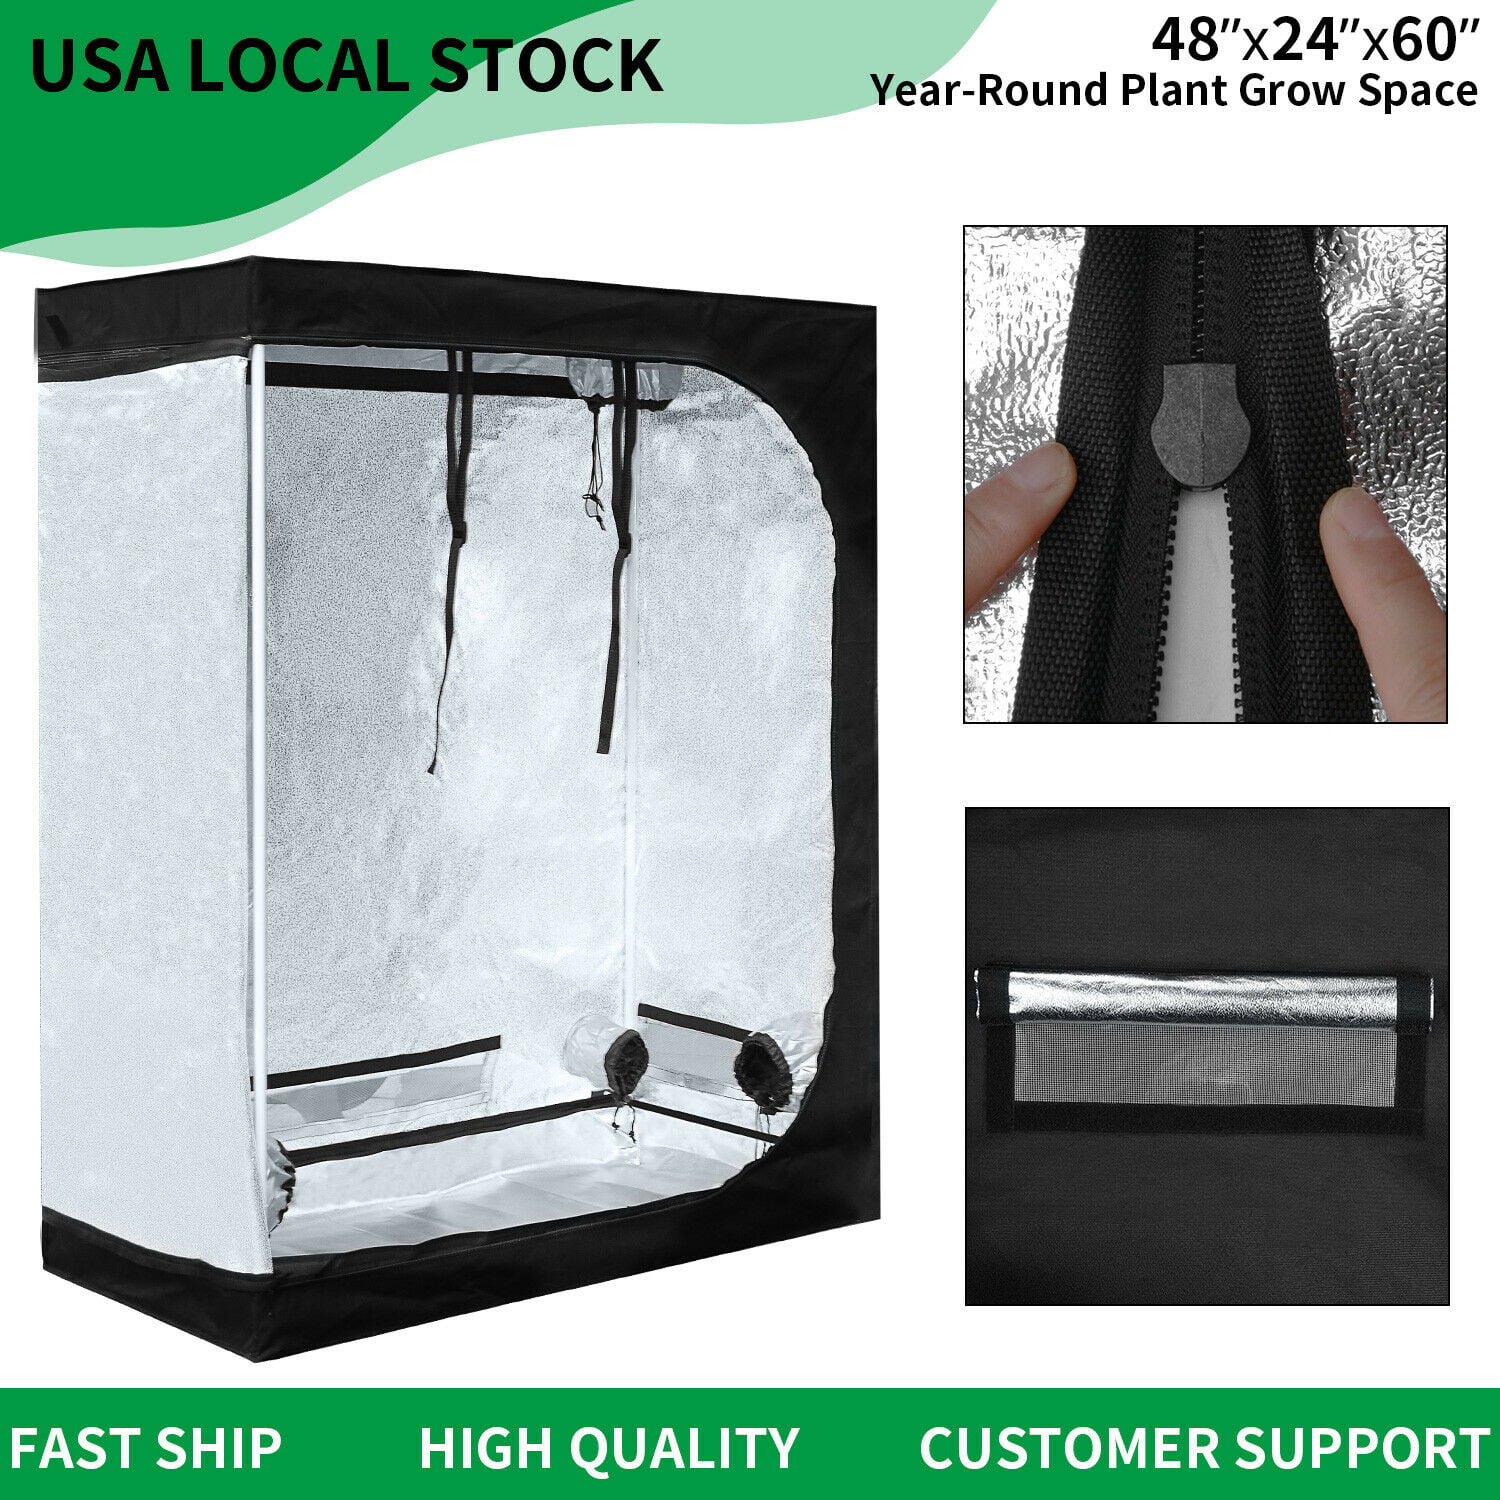 Horticulture Reflective Mylar Hydroponic Grow Tent for Plant Growing 